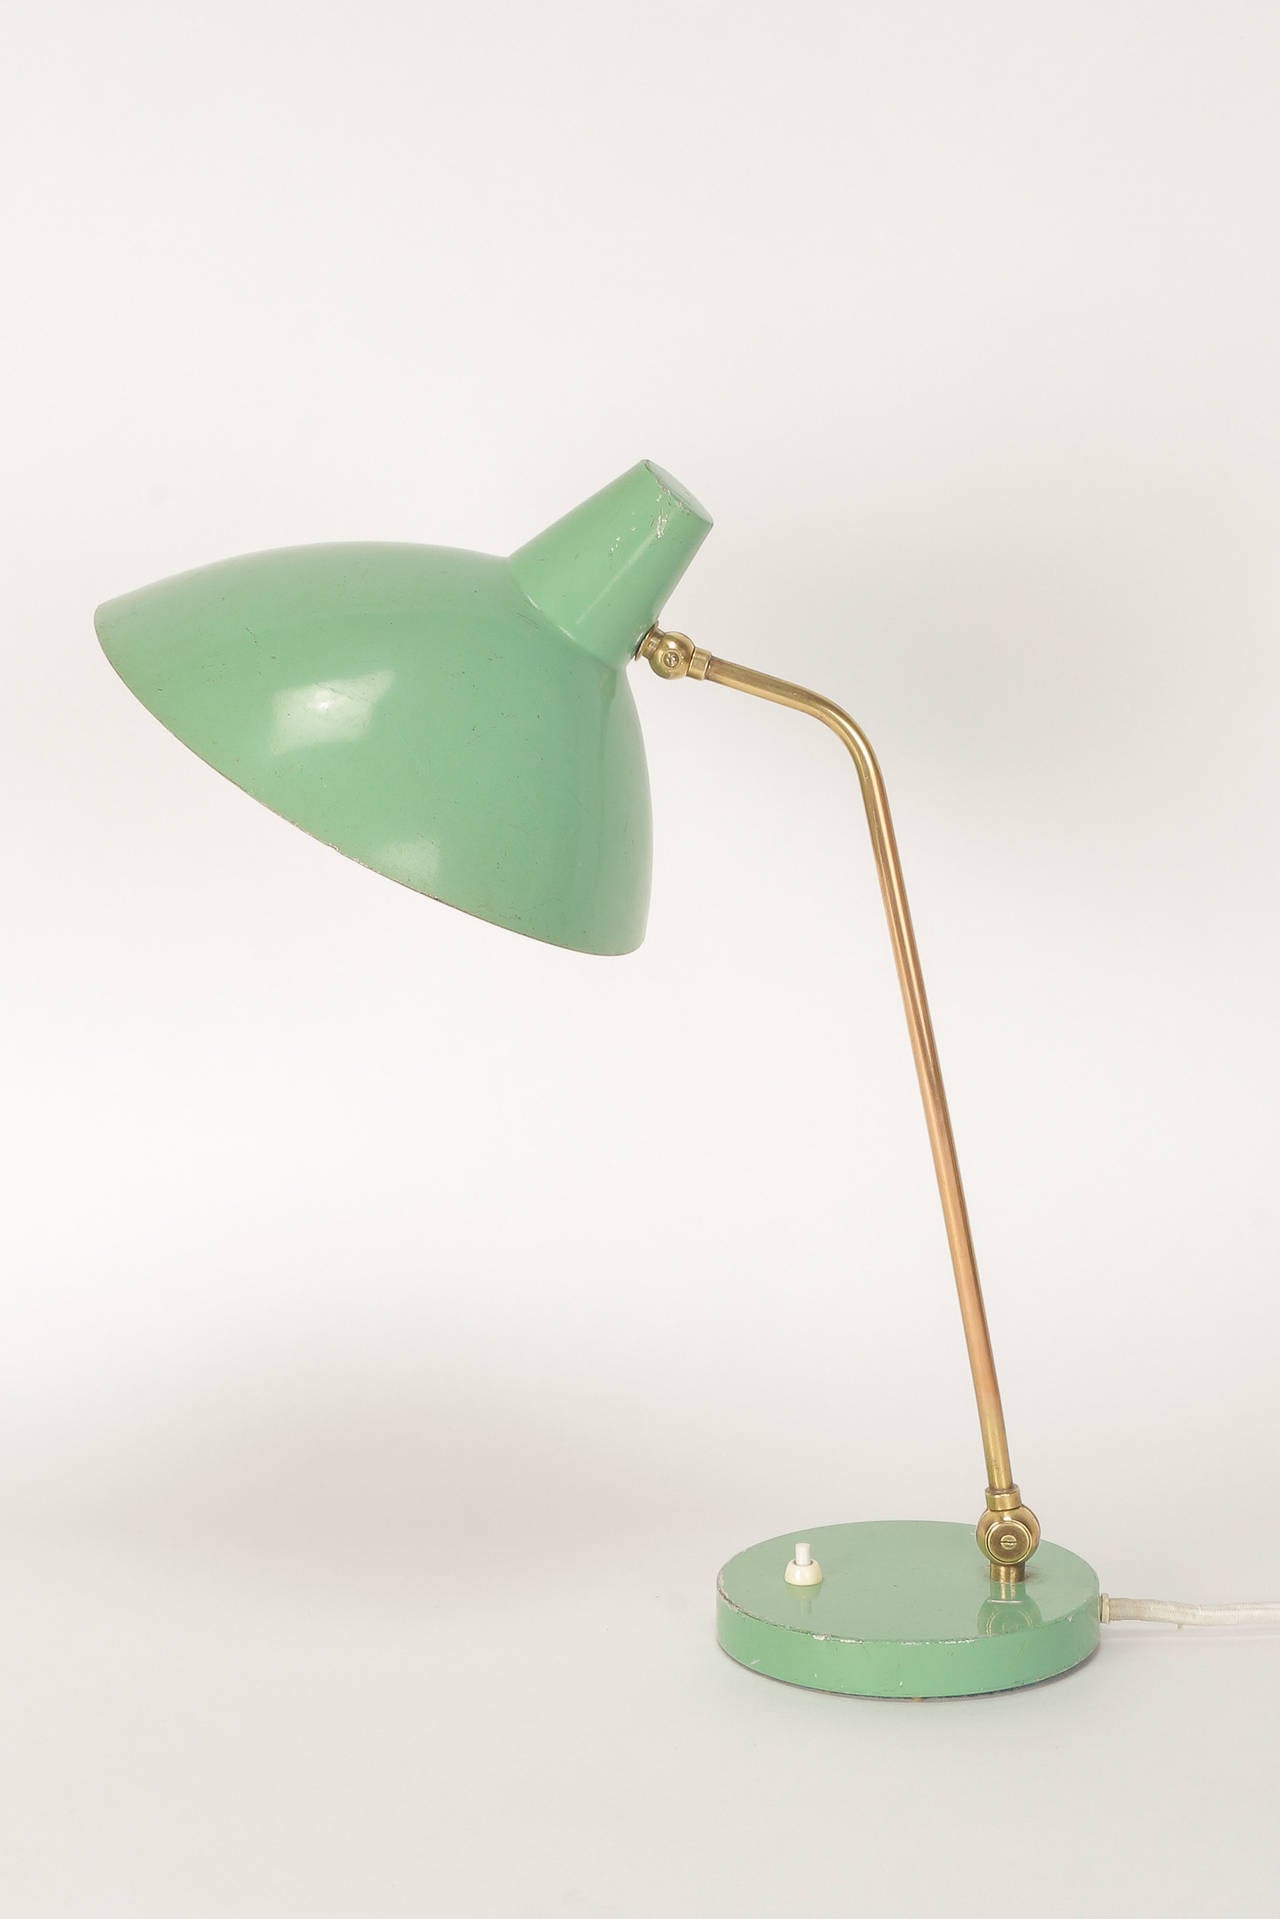 Rare Swiss desk lamp by Alfred Mueller for Amba, Switzerland, 1950s. Very unique (original) color in mint green. Shade and rod stem can be adjusted.